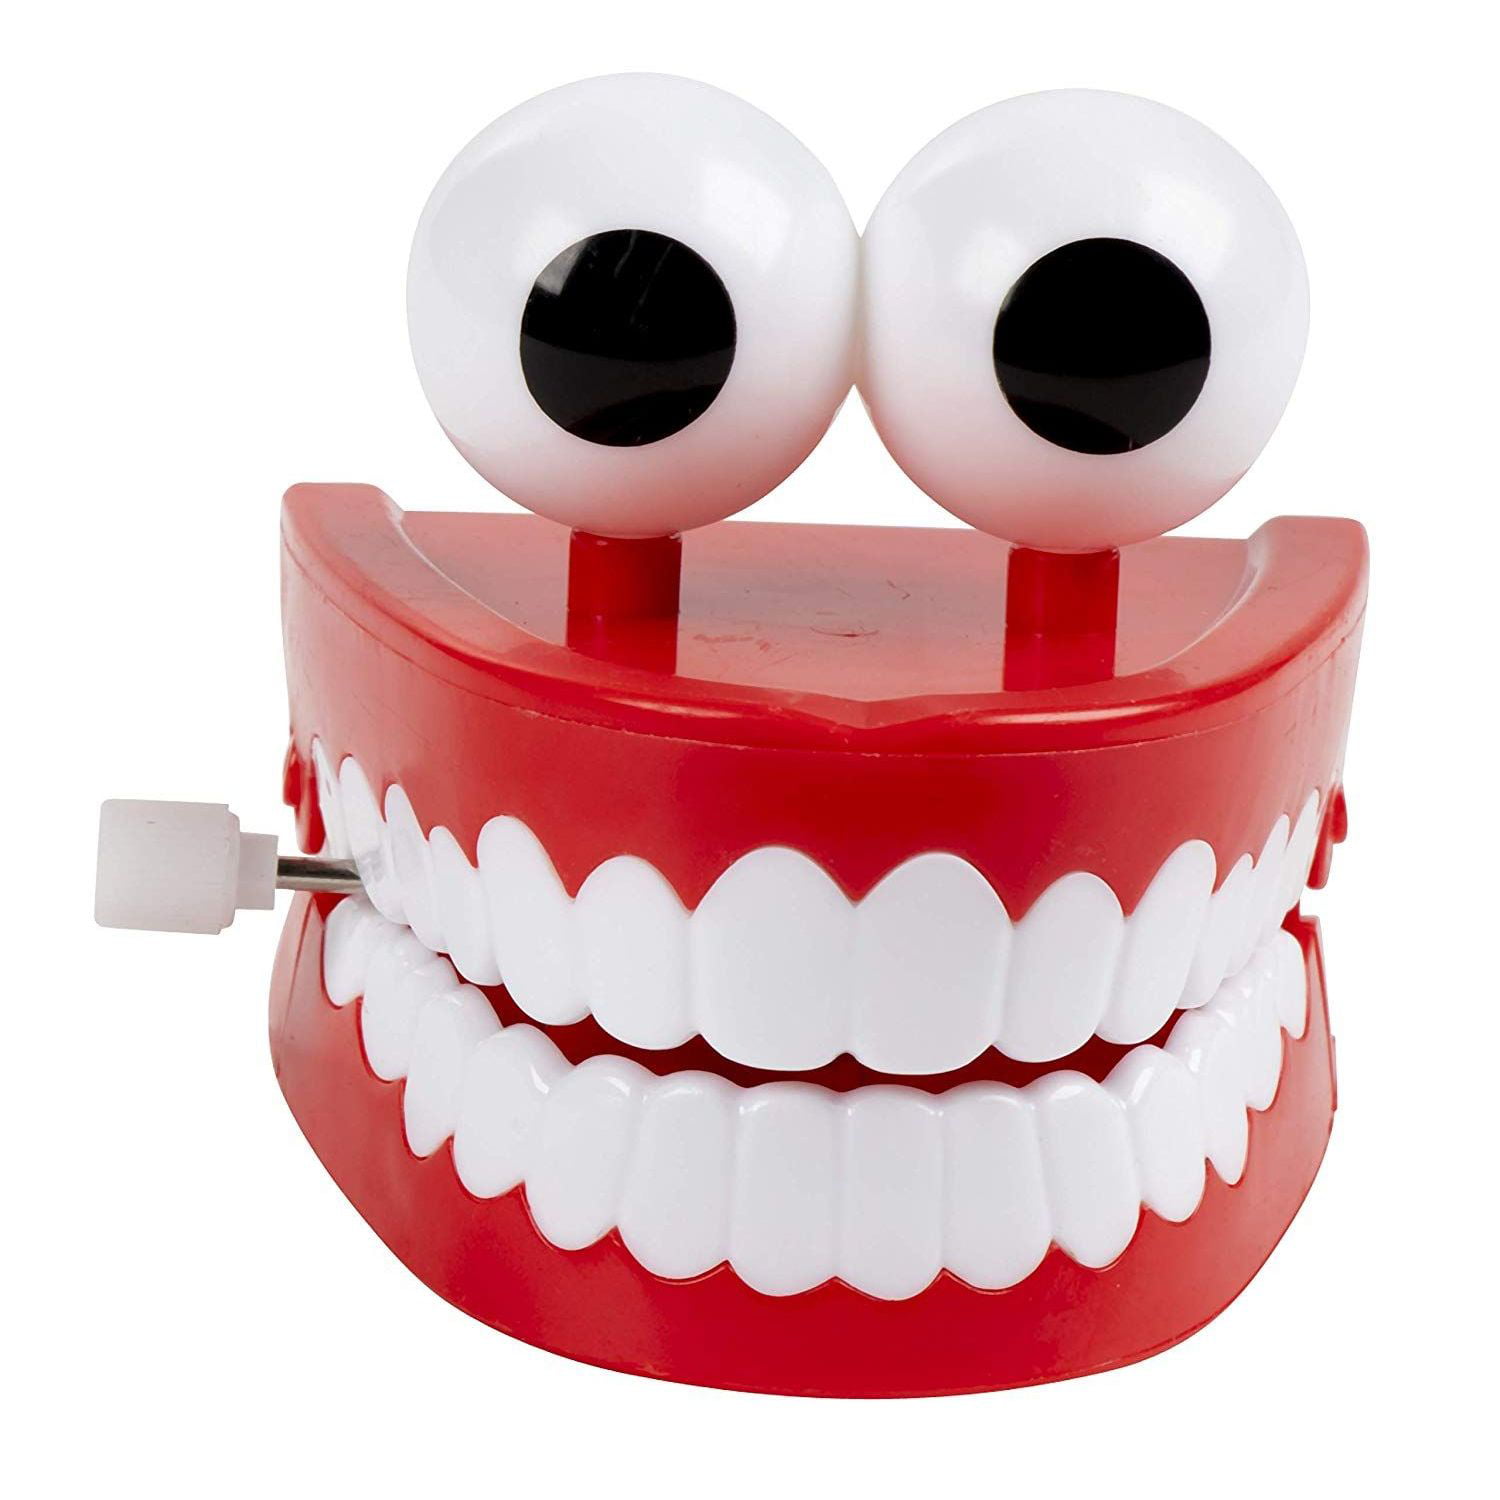 Eyeball Chattering Teeth Wind Up Gift Joke Toy 2.5 X 2.6 X 2.5 Inches Brand New 